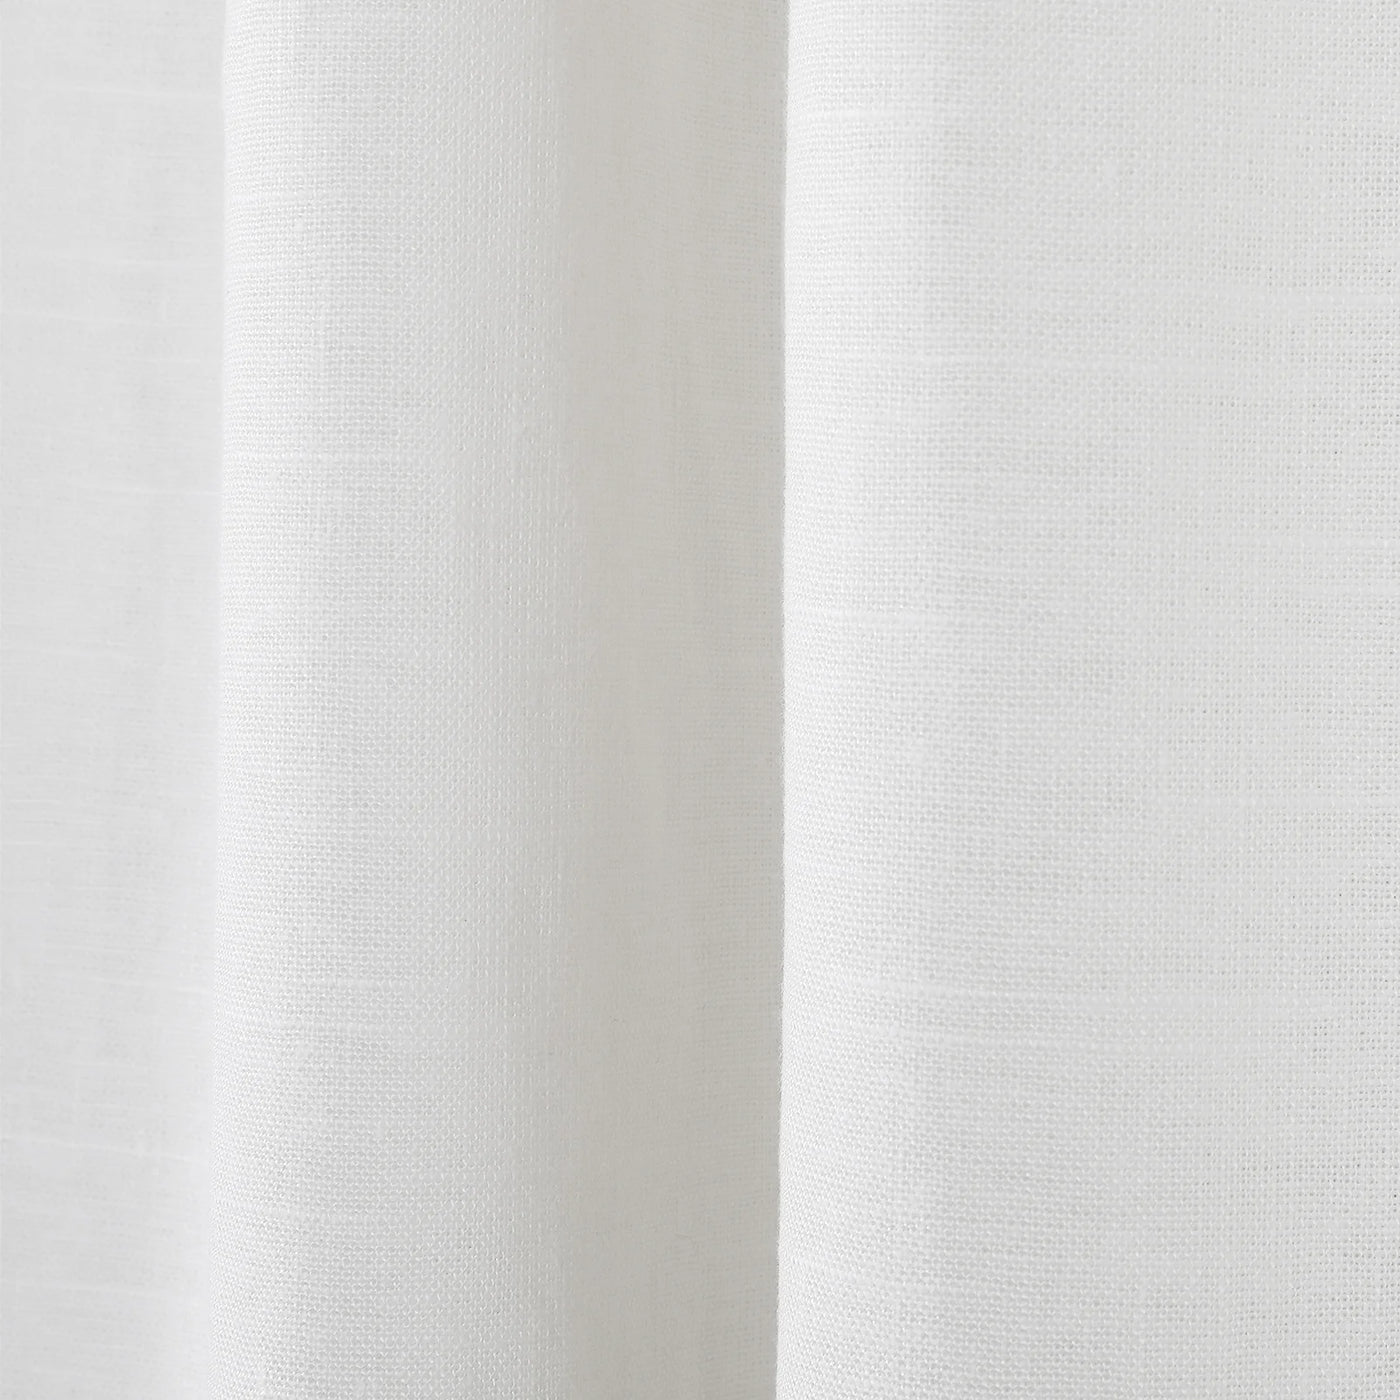 Jawara Linen Cotton Drapery 4-In-1 with Blackout Lining